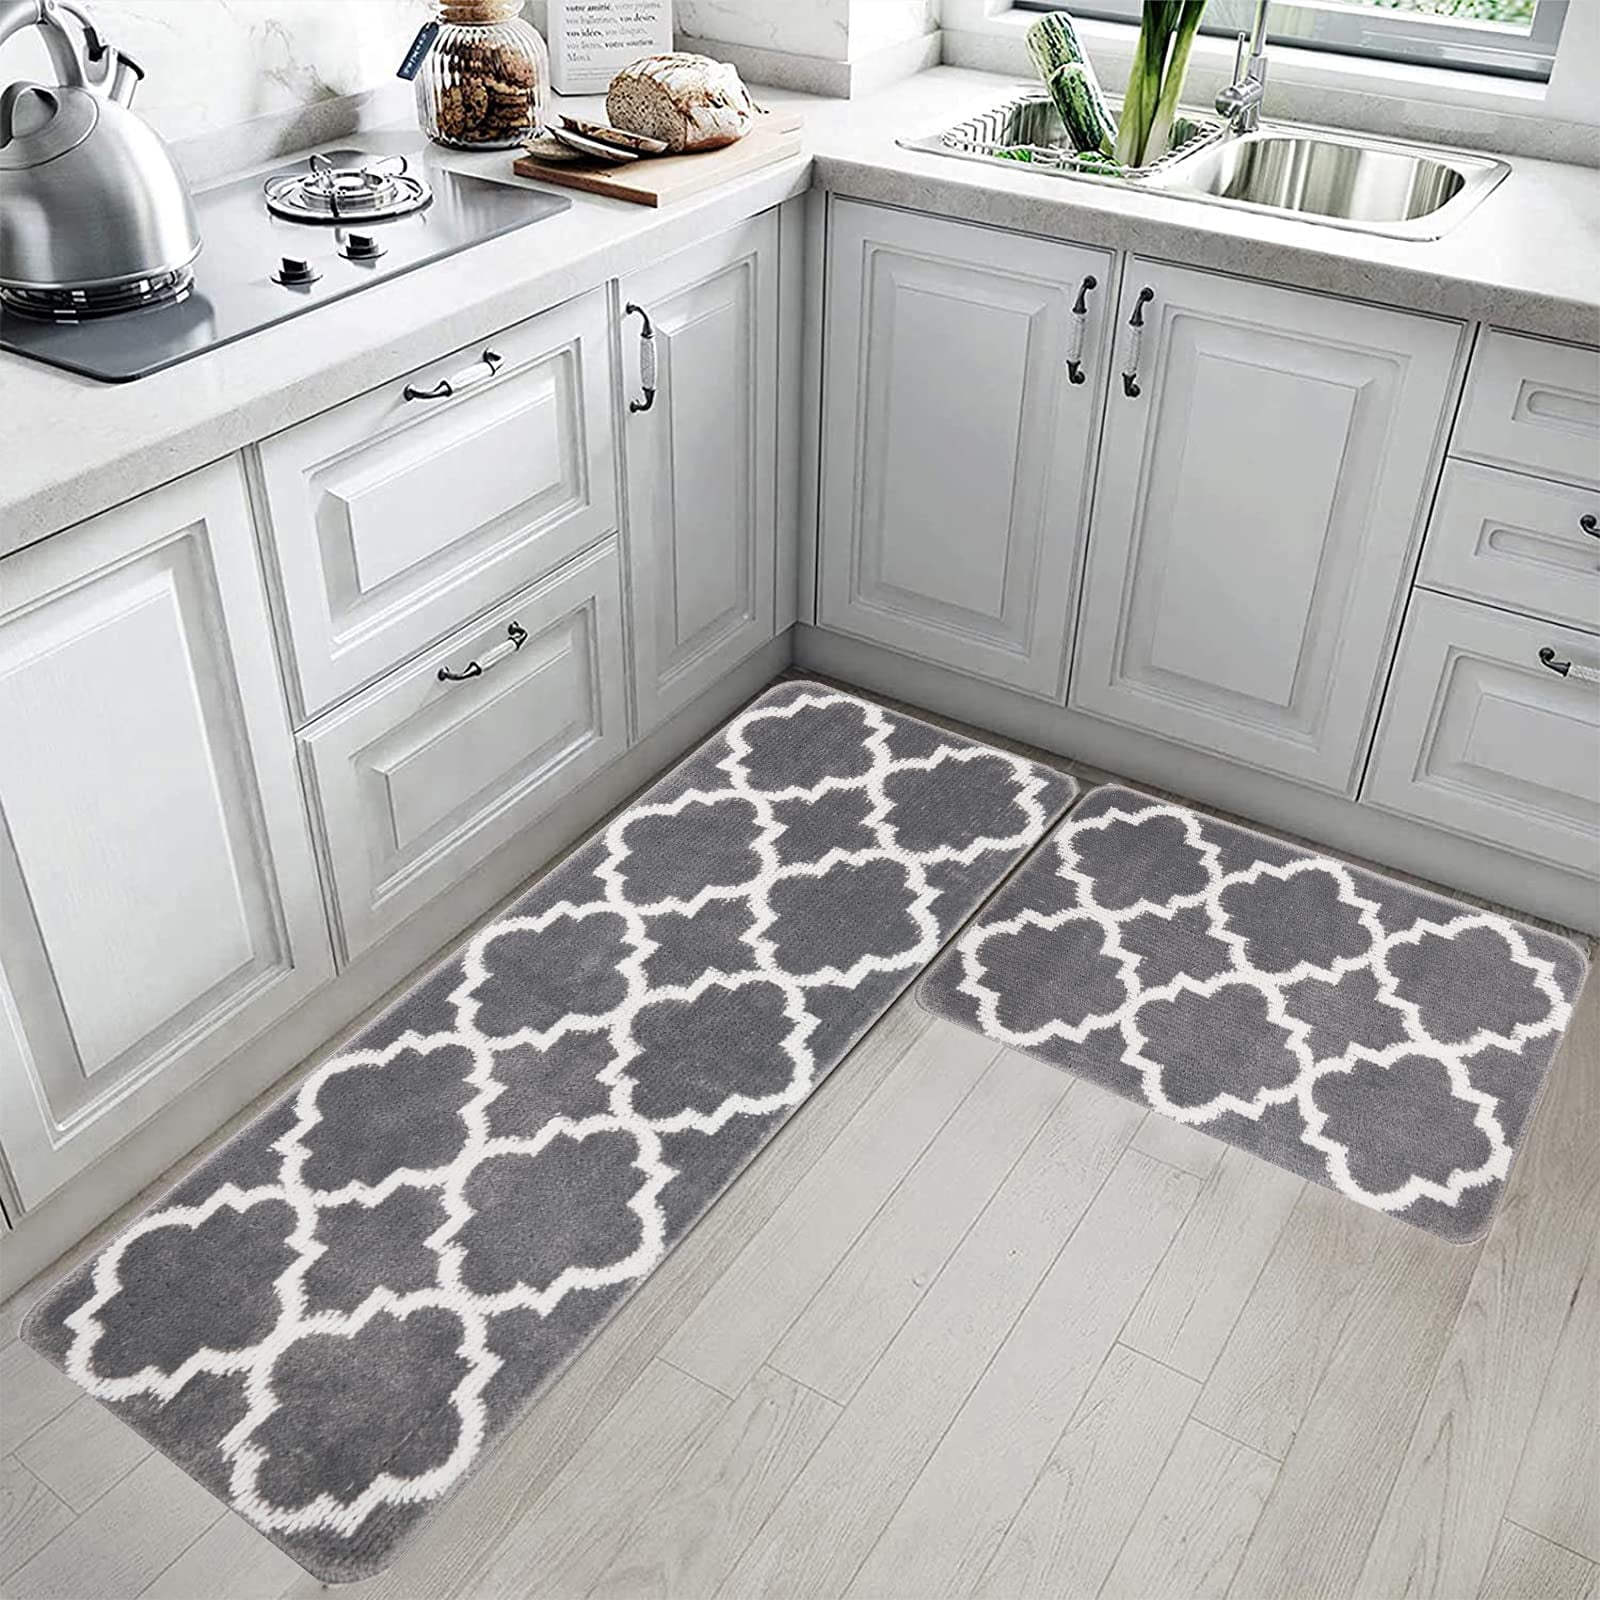 TEAL BLUE CREAM Kitchen Utility Runner Rug Sisal like Durable IN & OUT DOOR Mat 